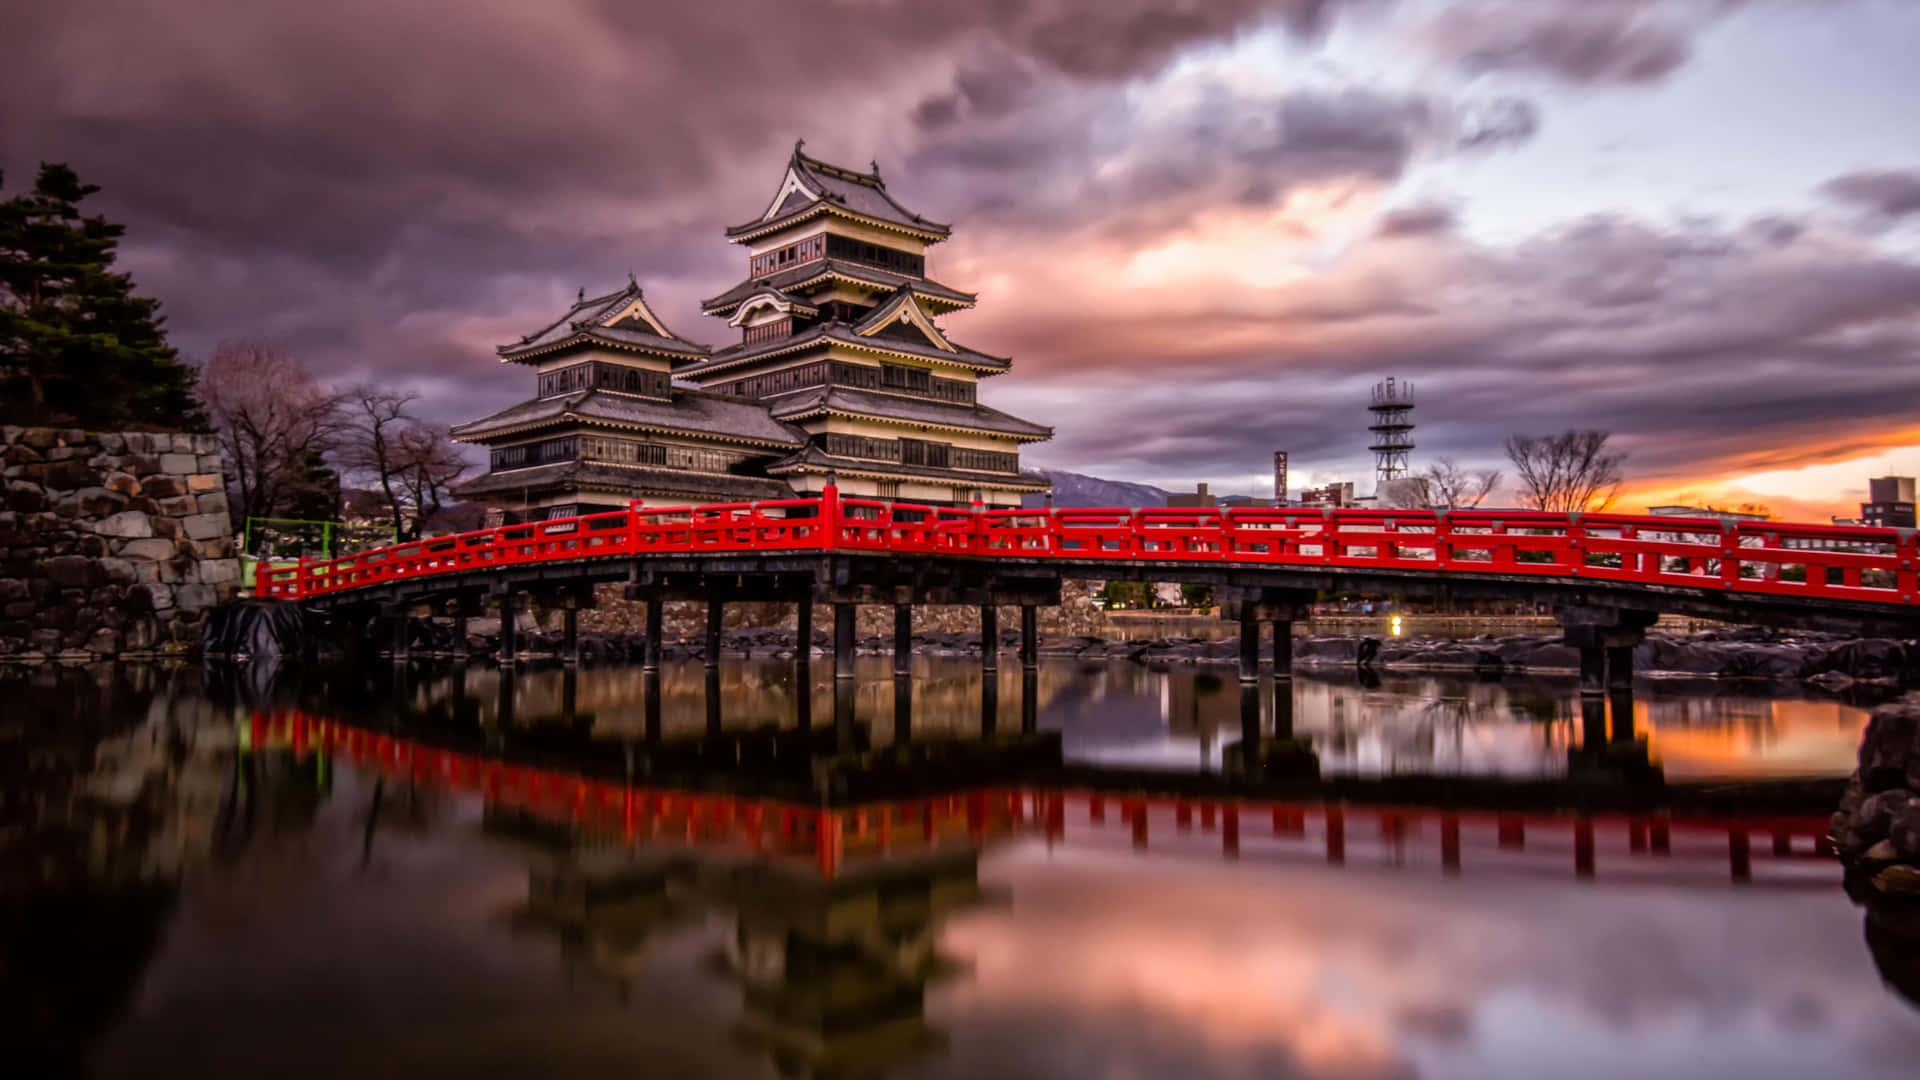 Matsumoto Castle On Cloudy Day During Sunset Wallpaper